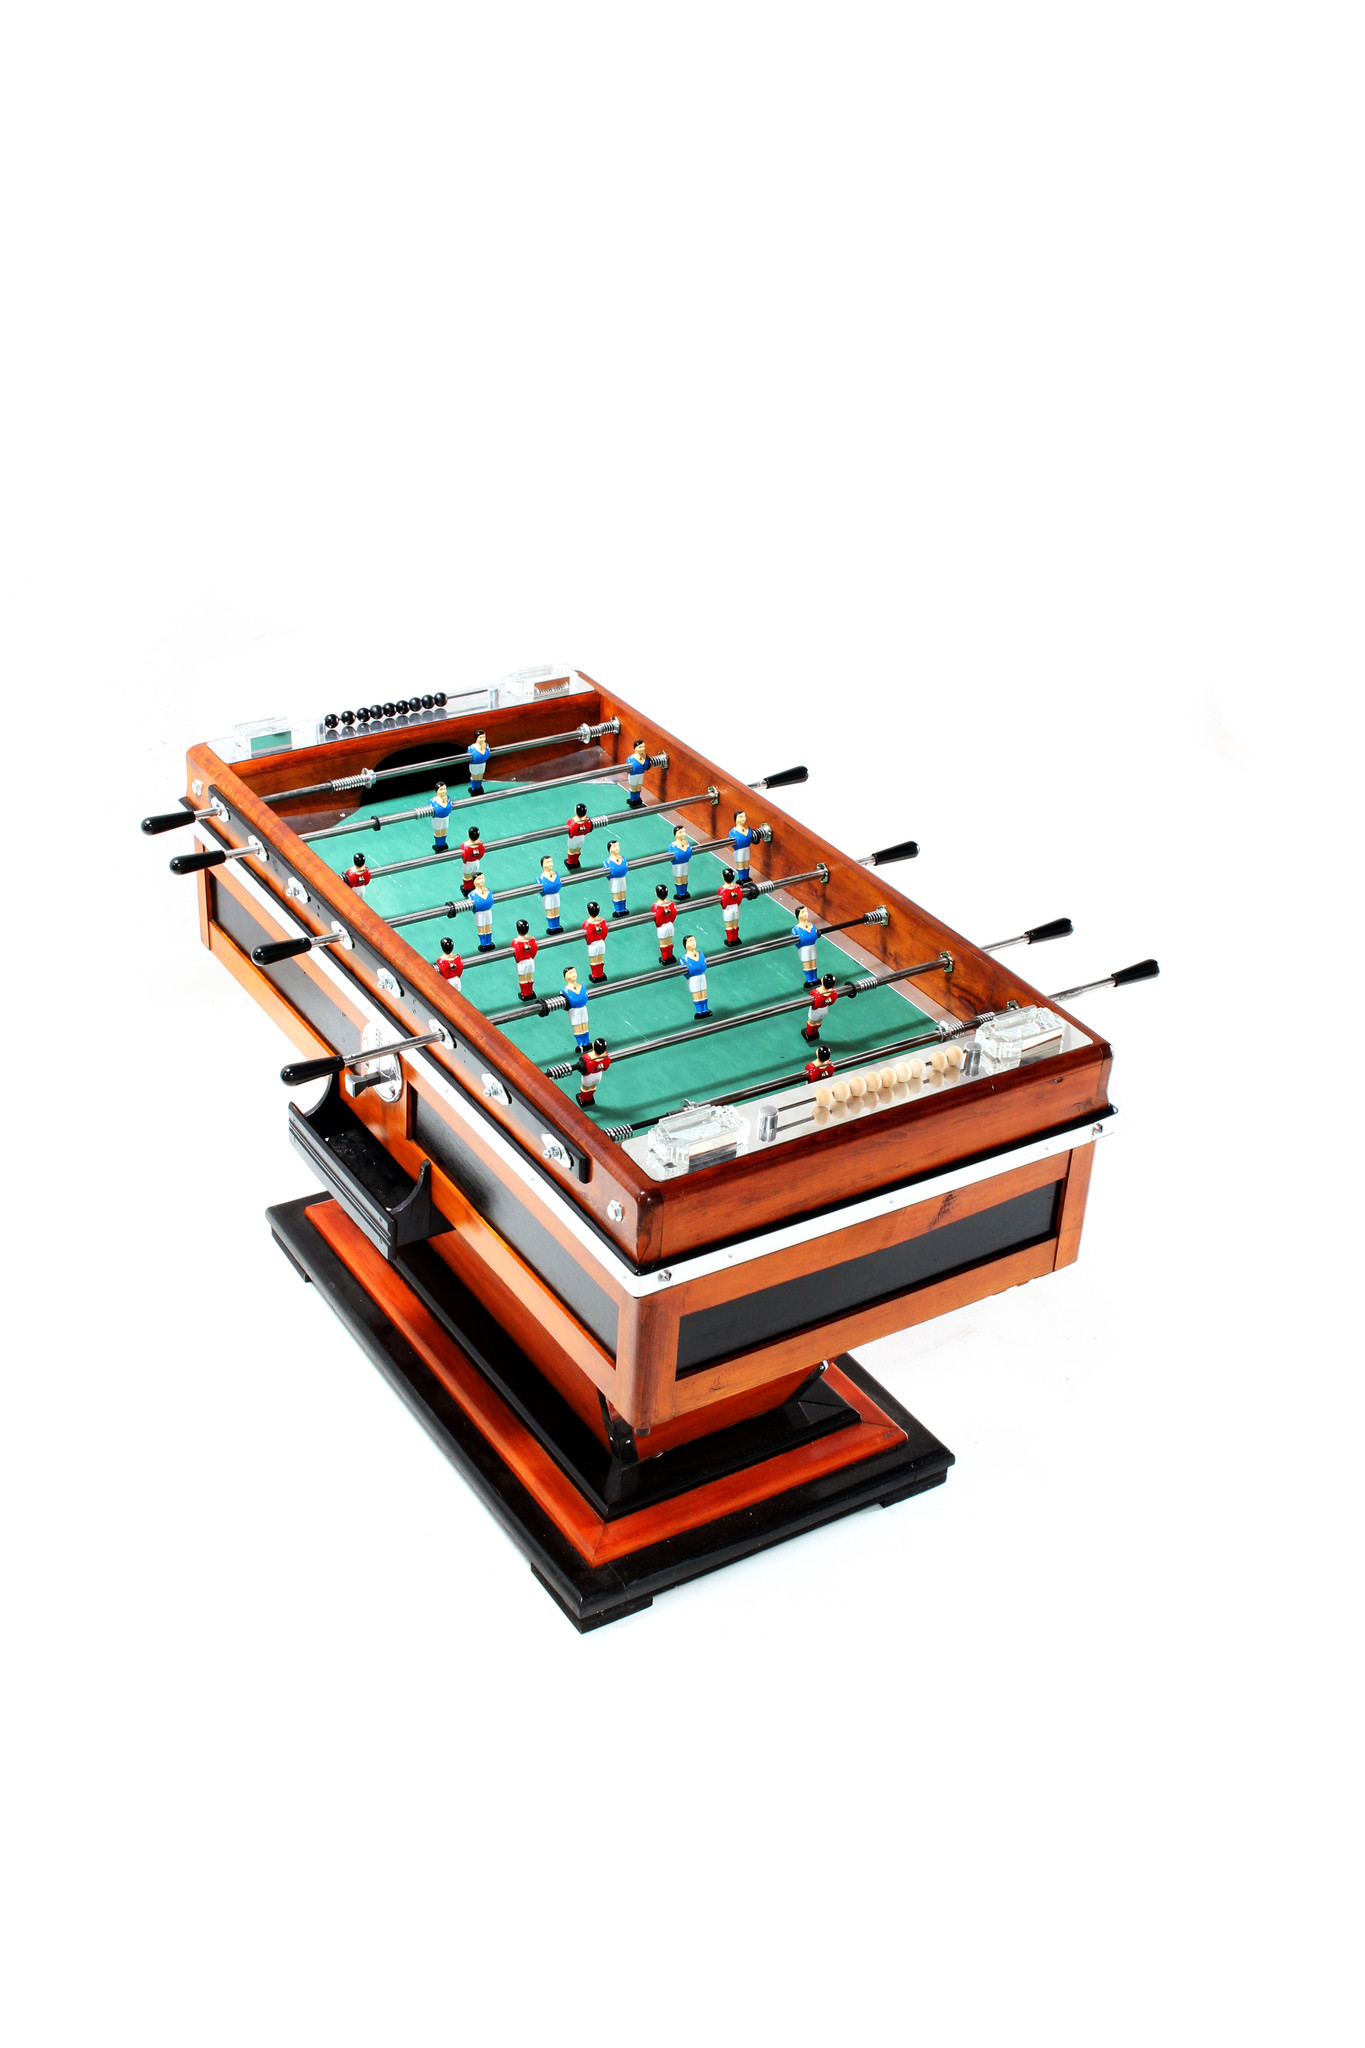 Vintage table football game 1940's